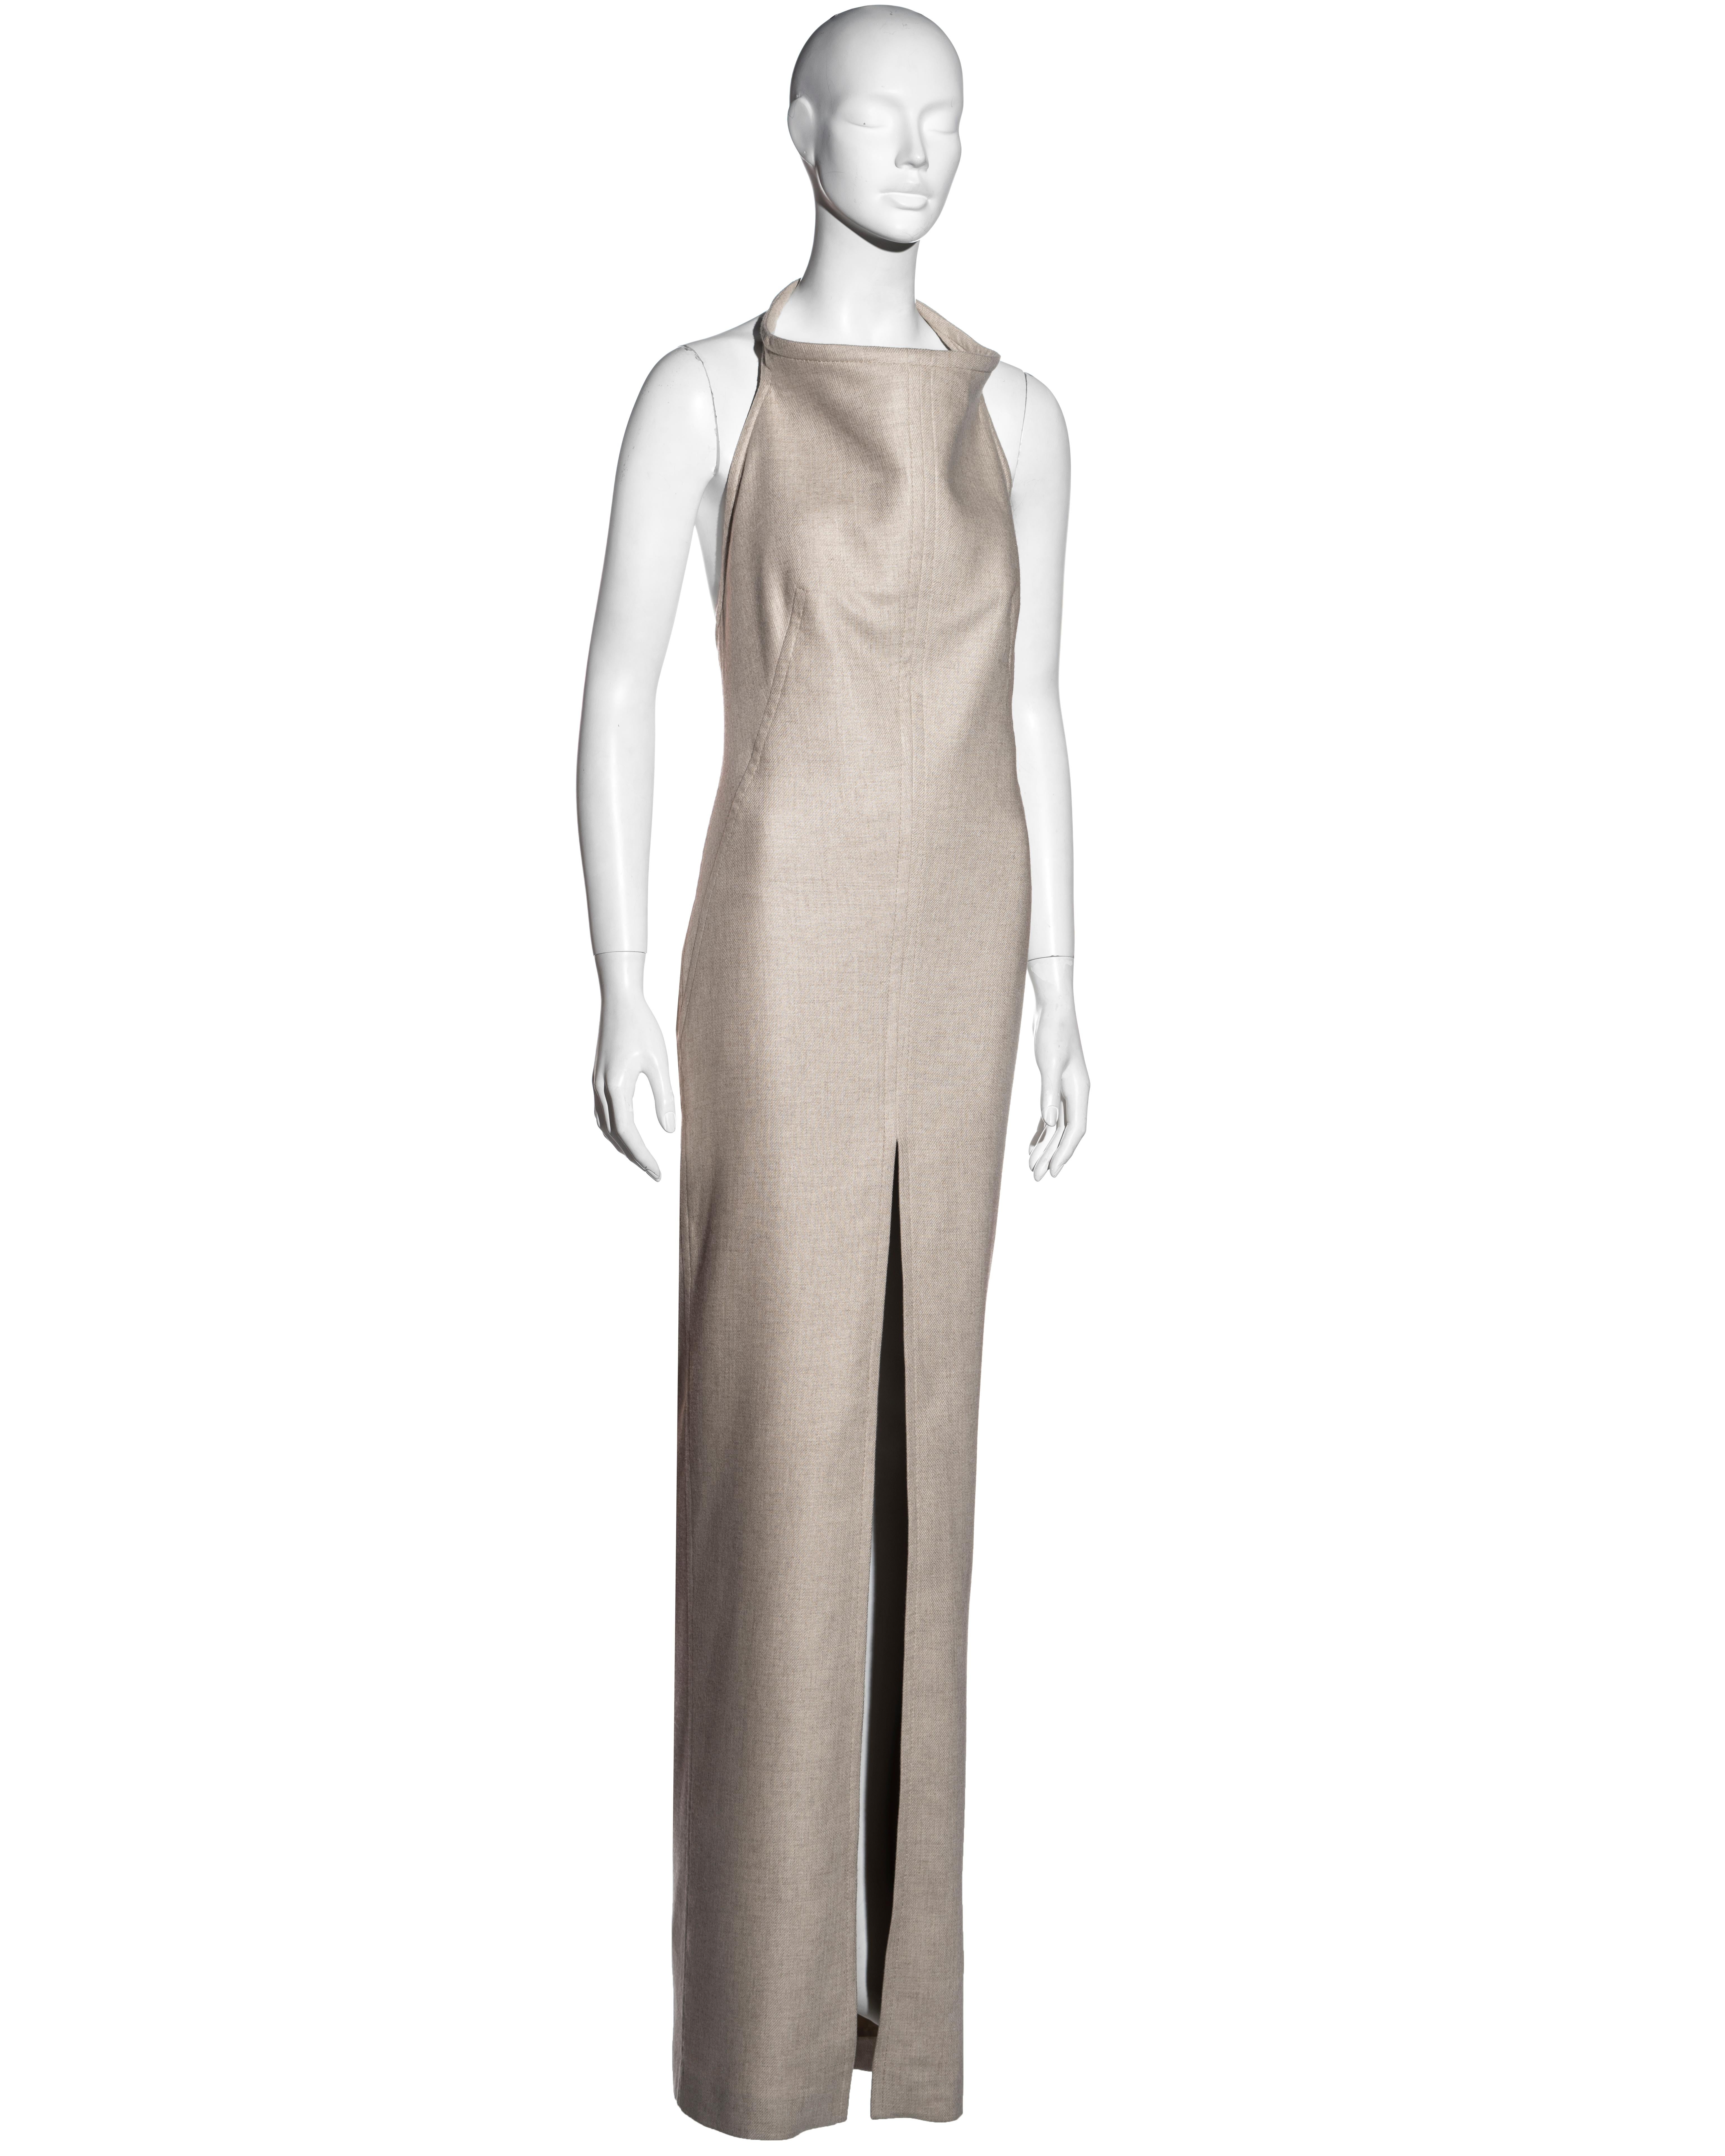 Gianfranco Ferre beige wool column dress, fw 1999 In Excellent Condition For Sale In London, GB